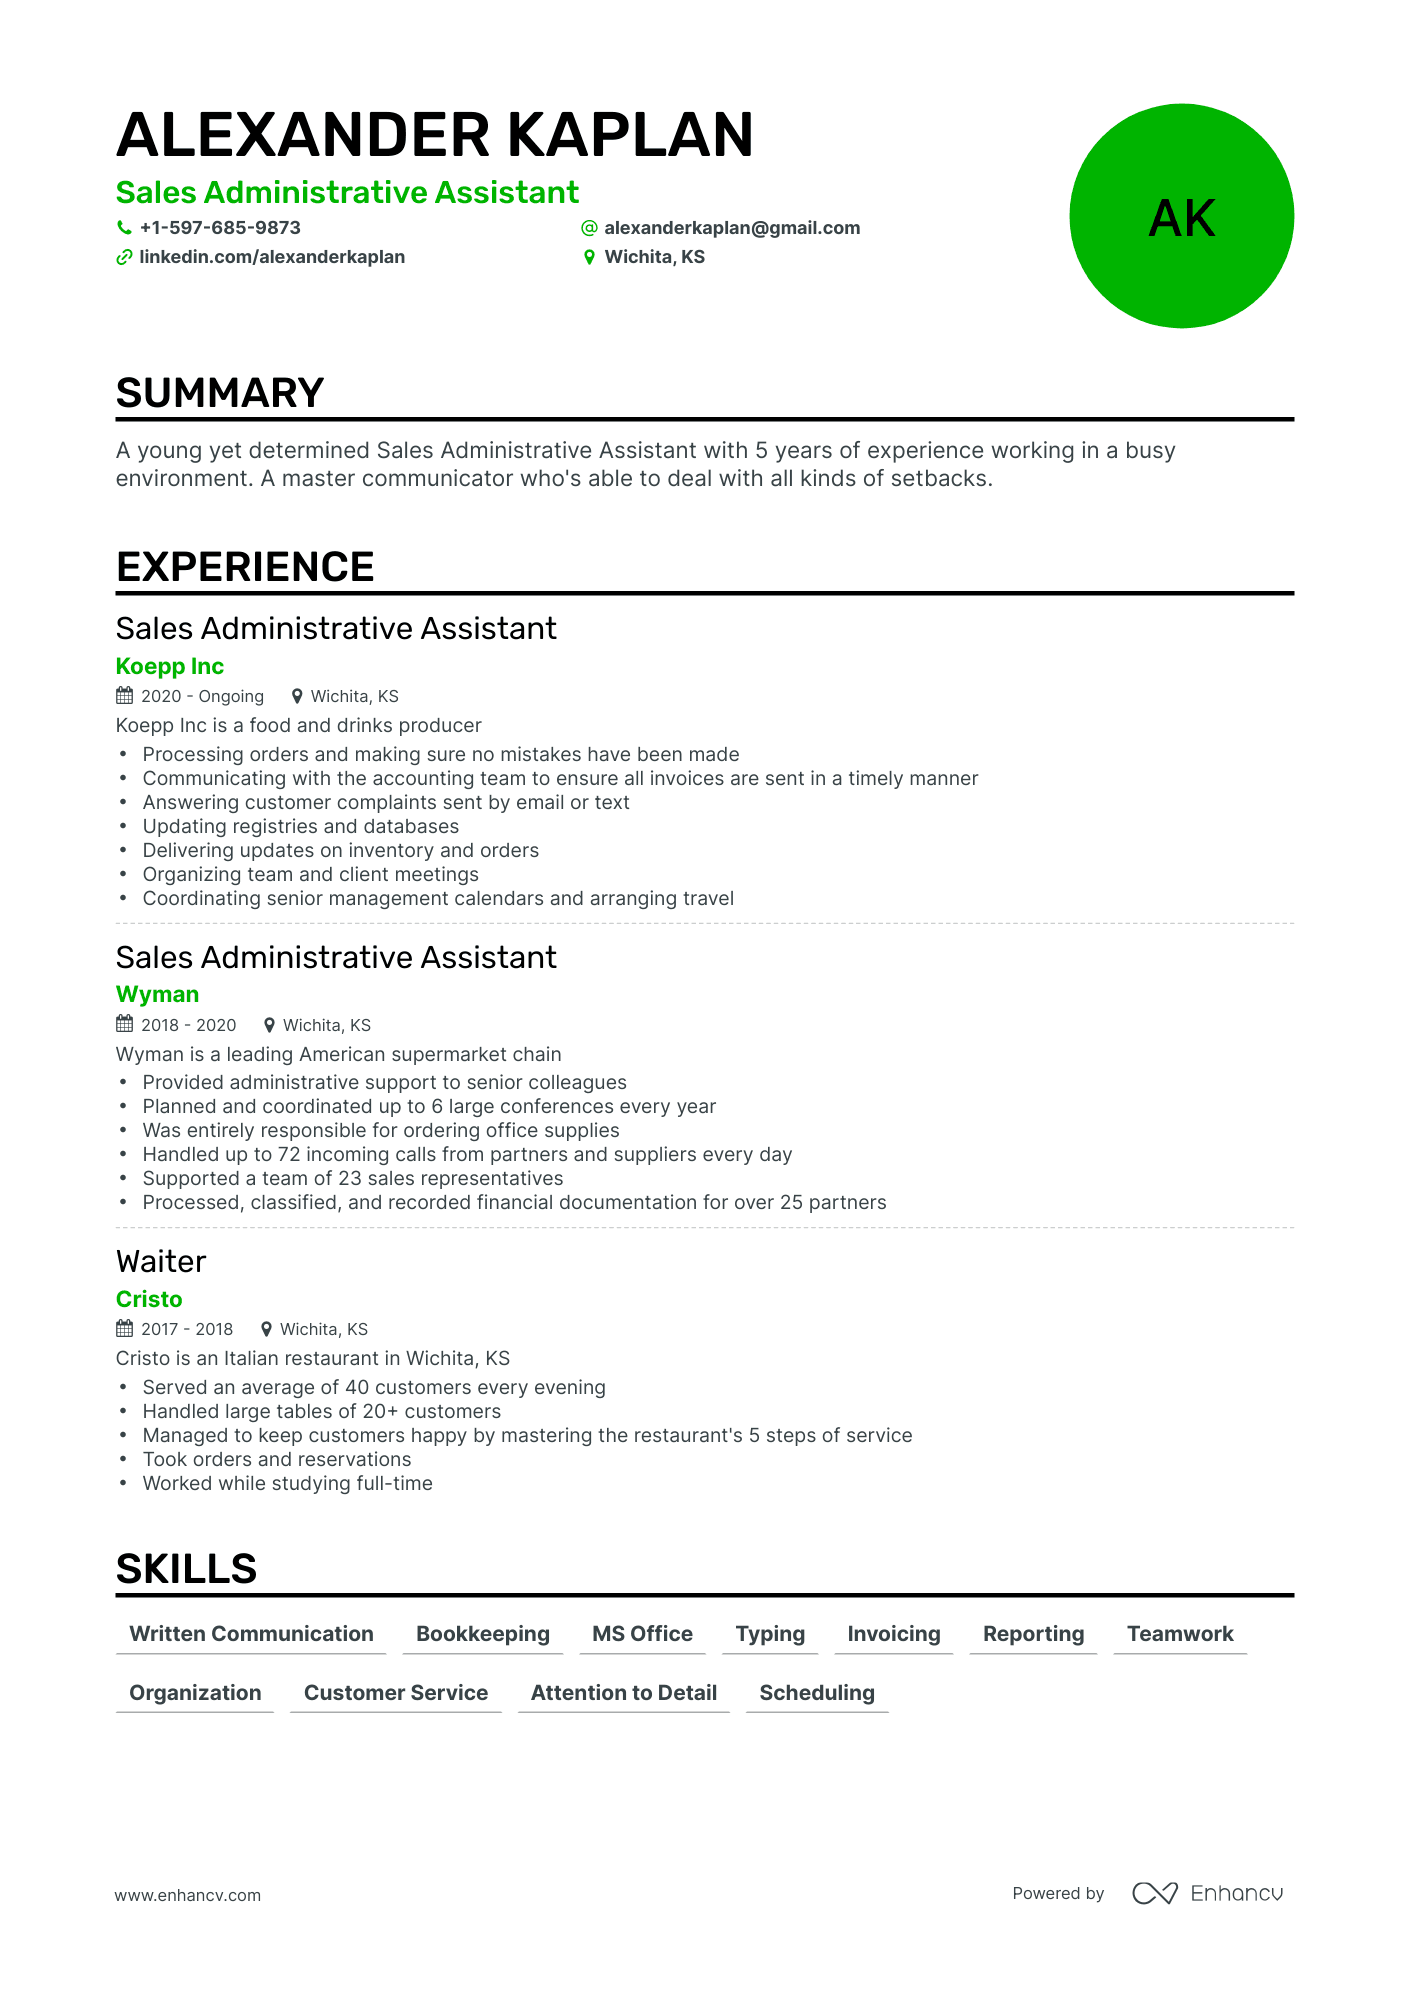 Classic Sales Administrative Assistant Resume Template